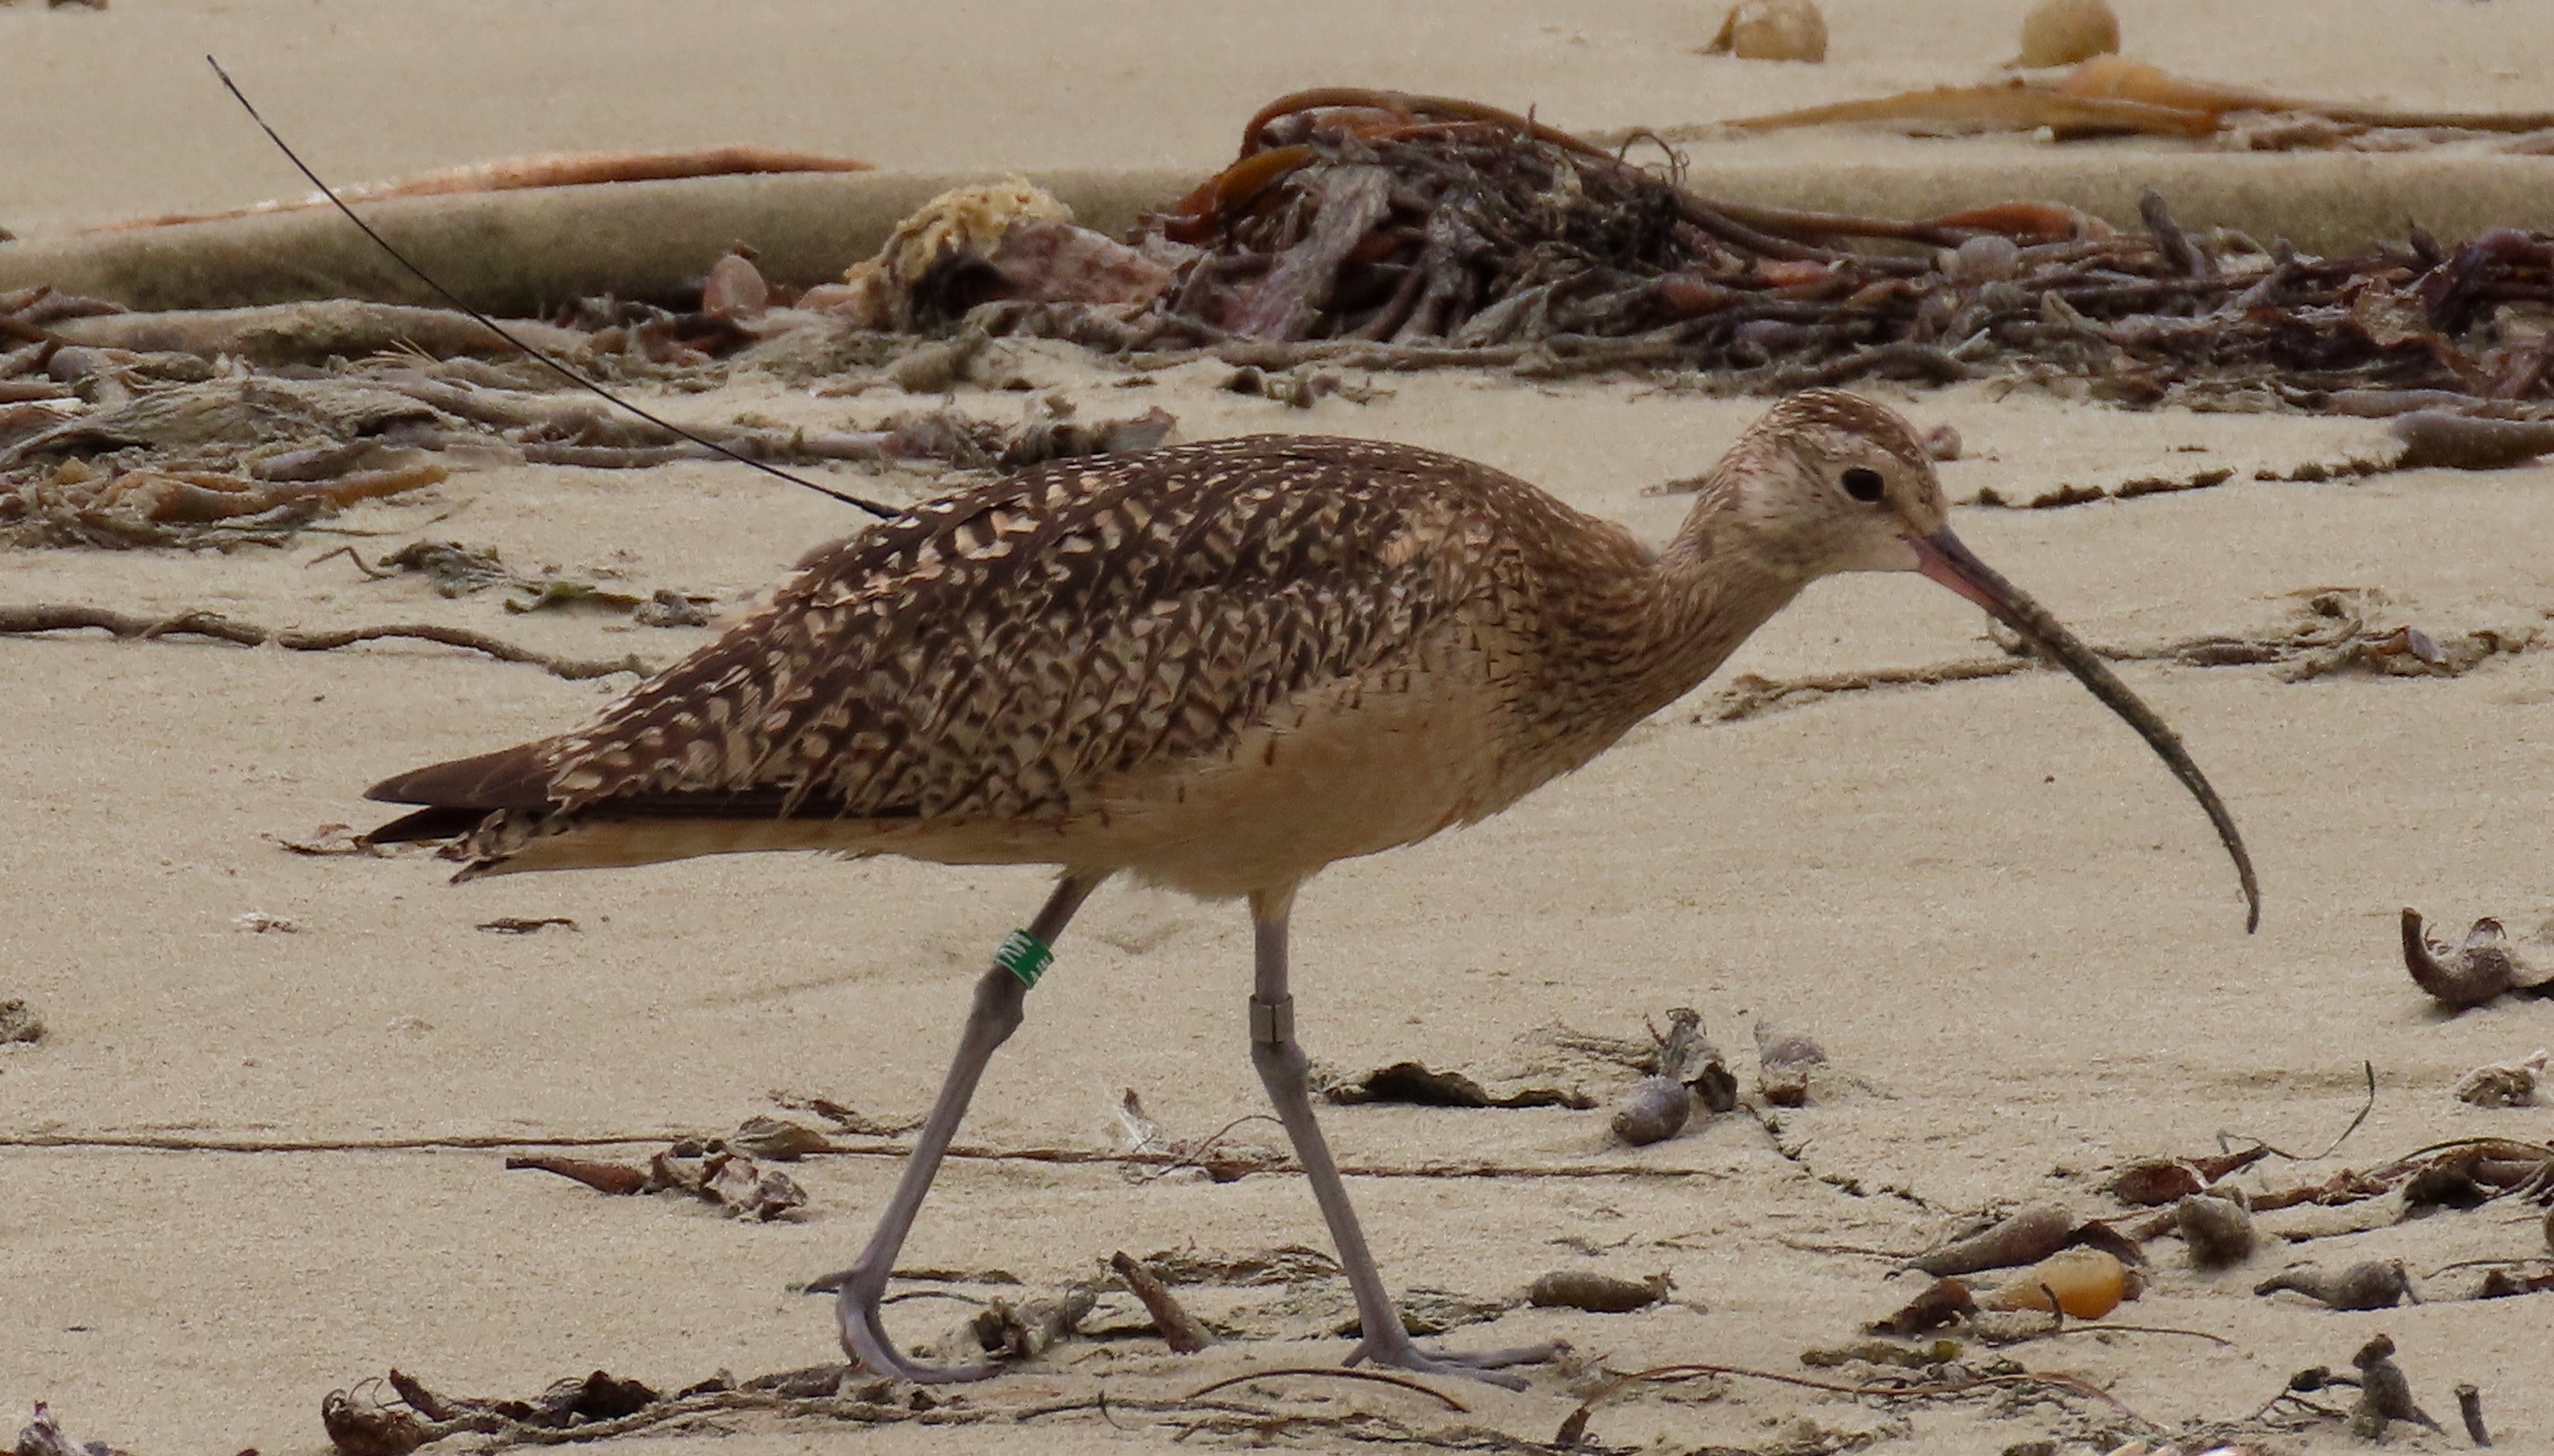 a curlew standing on sand. A thin antenna is visible sticking out from his back feathers. He has a green leg band on one leg and a metal band around the other.